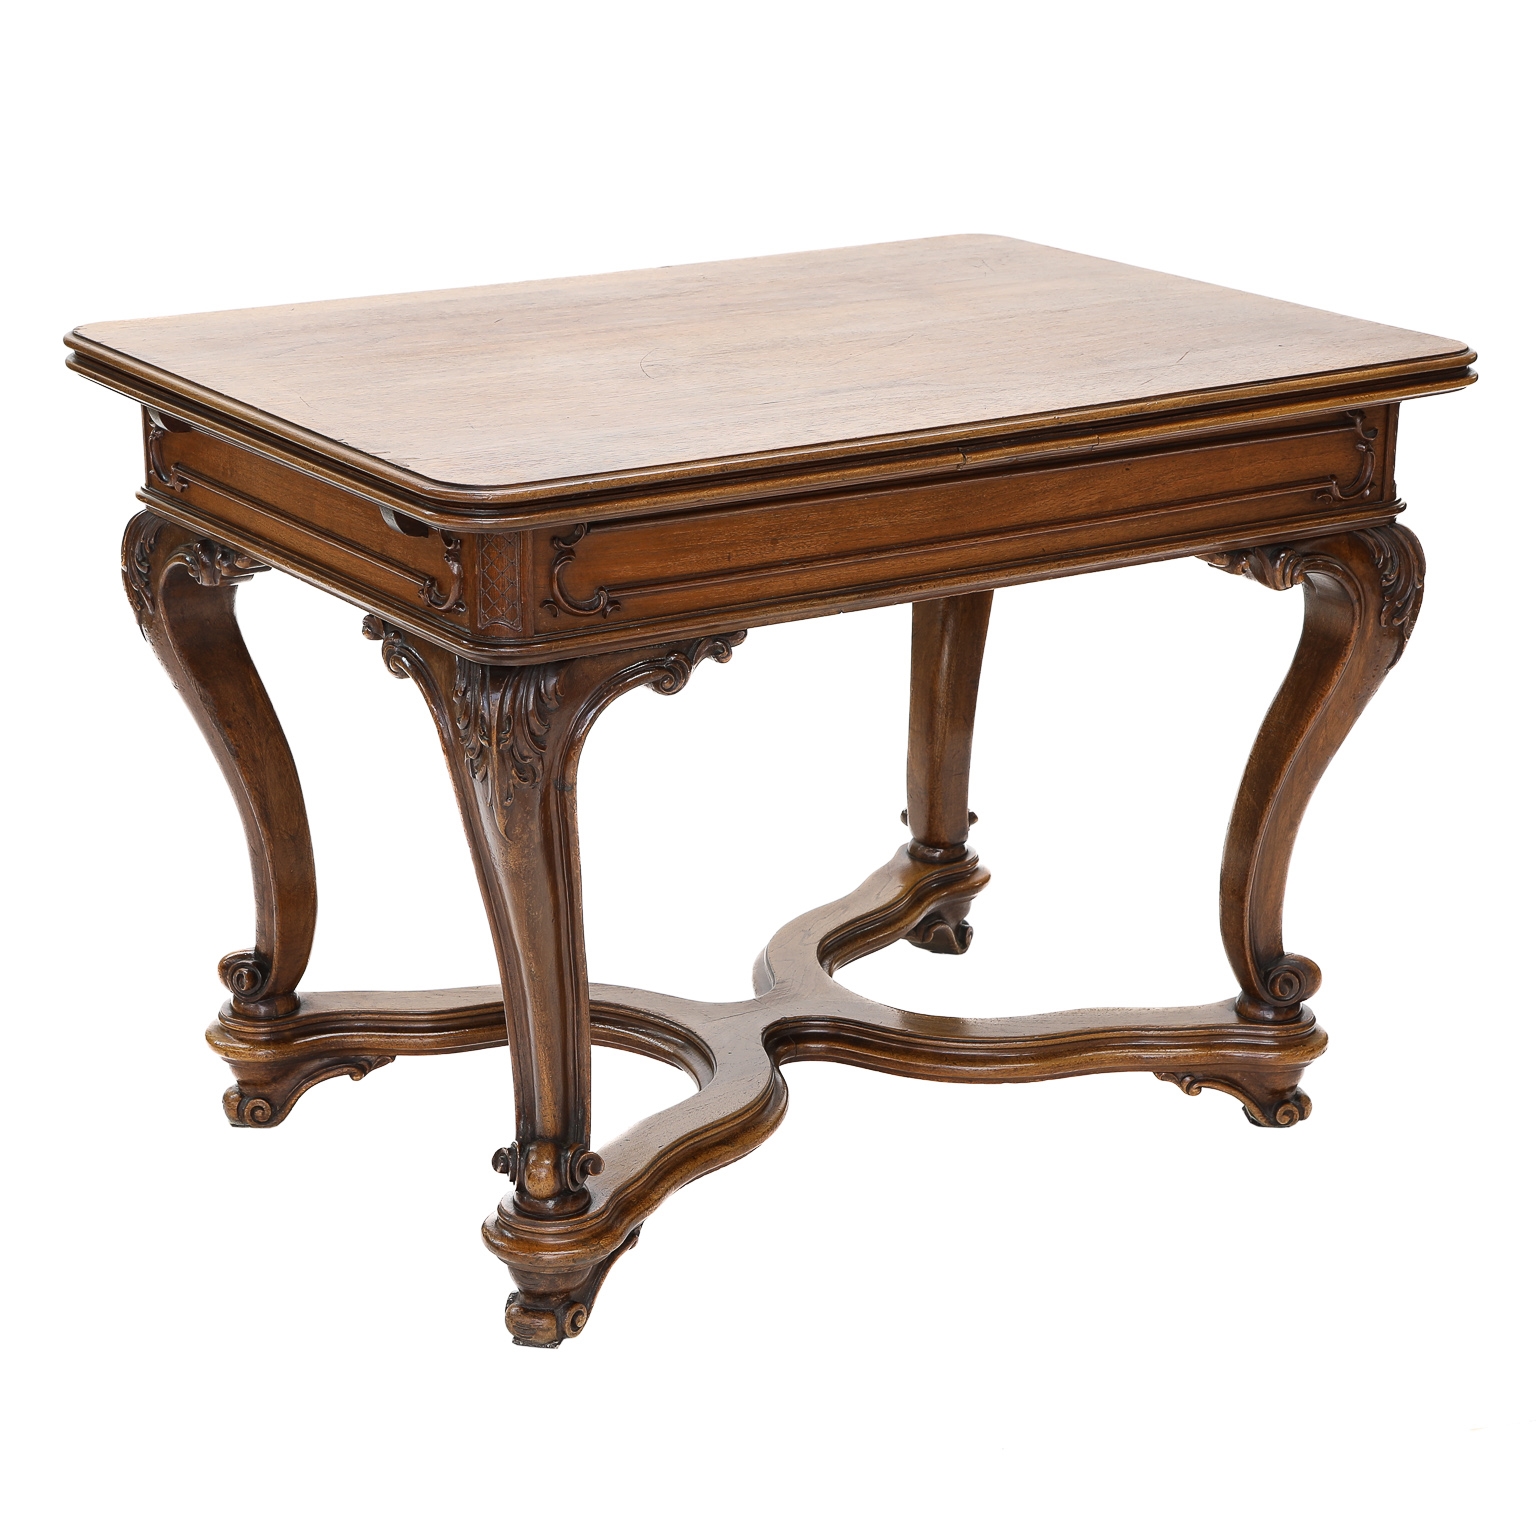 Sold at Auction: Louis XV Style Acacia Wood Side Chair in Walnut Finish